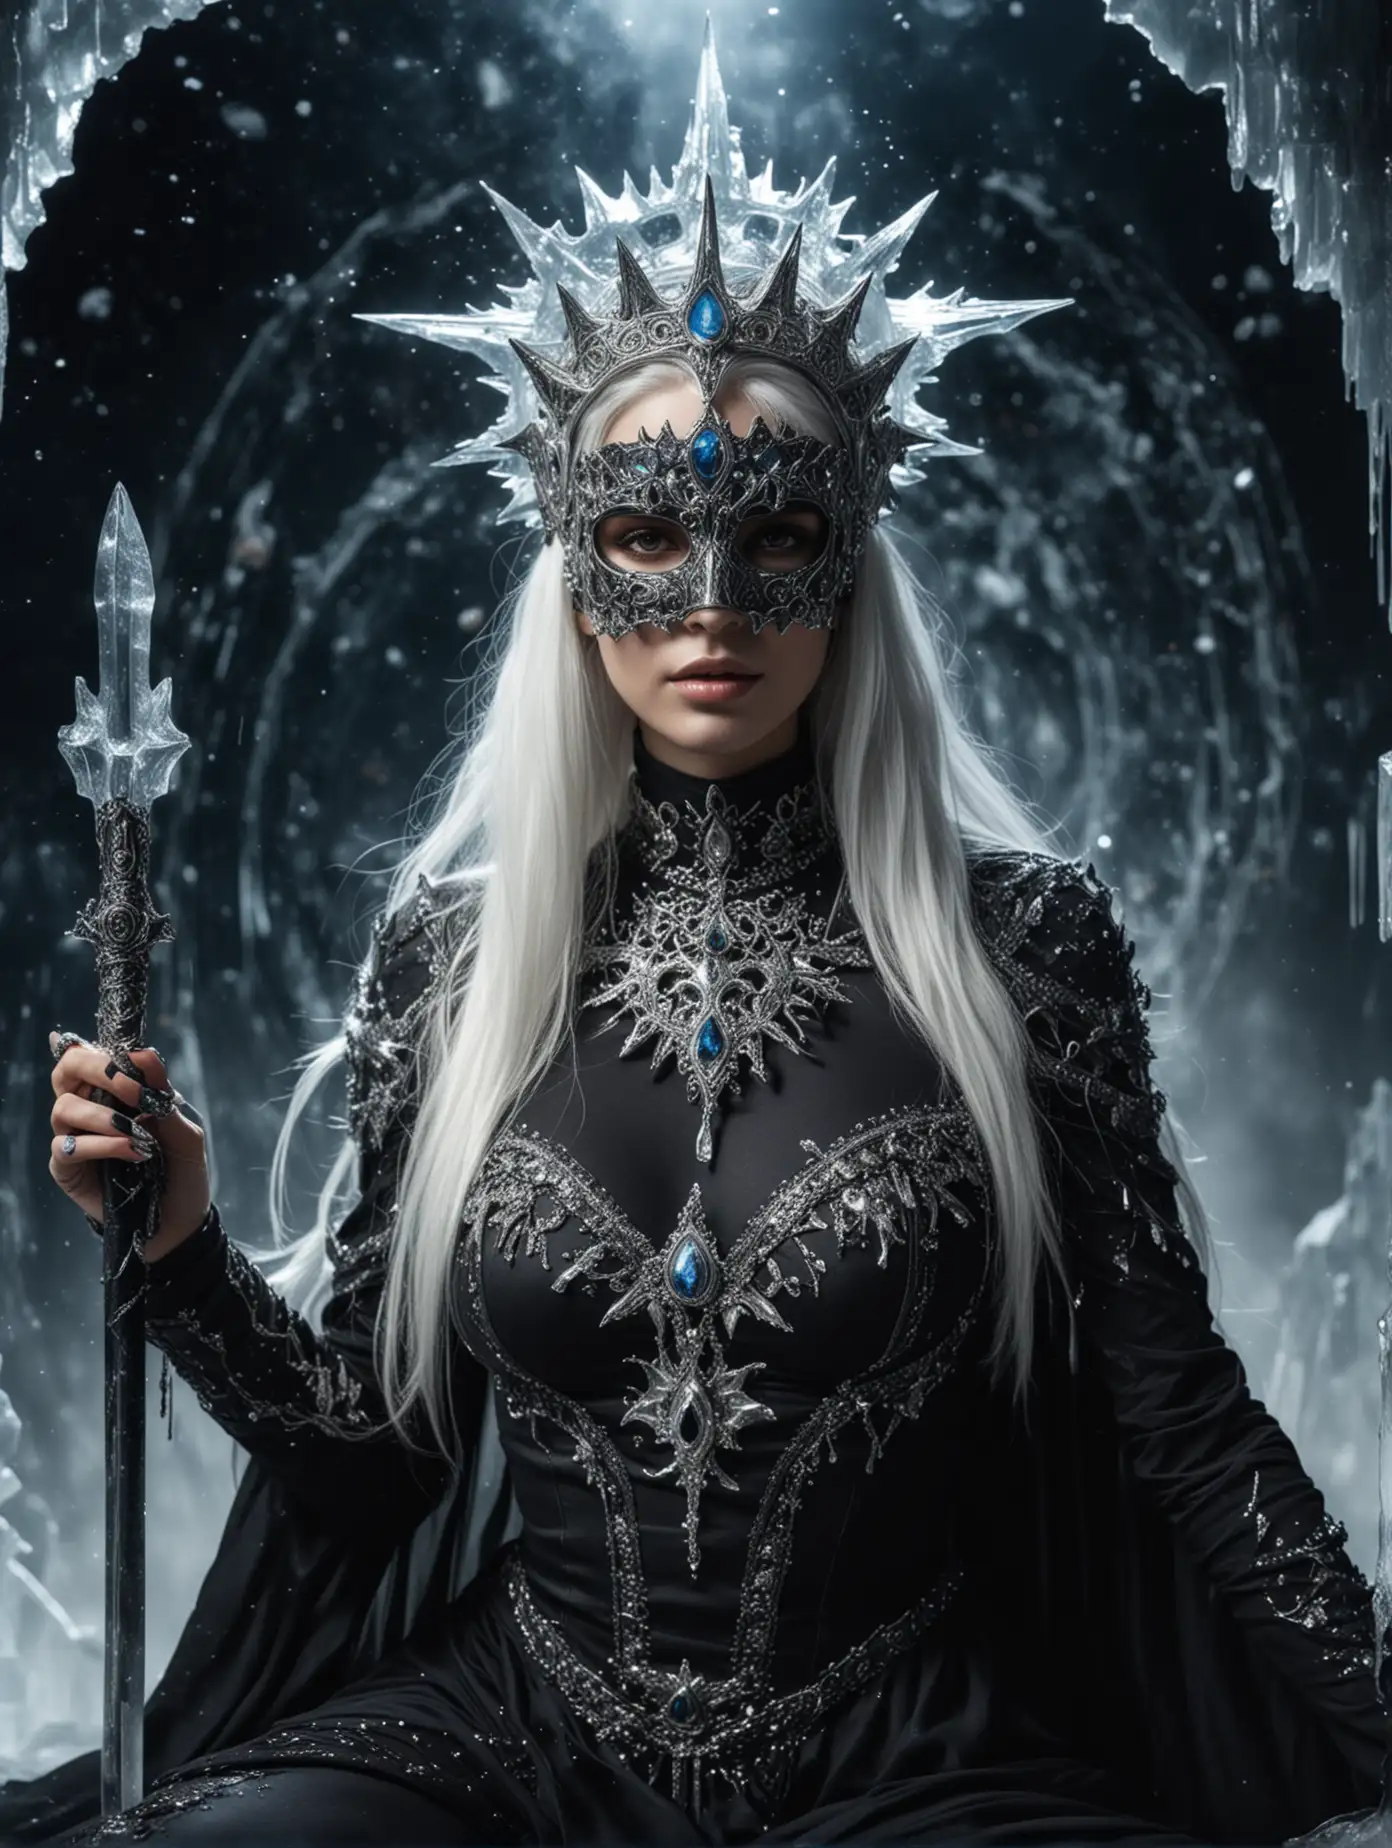 WomanGoddess-with-Ice-Sword-on-Icy-Throne-in-Space